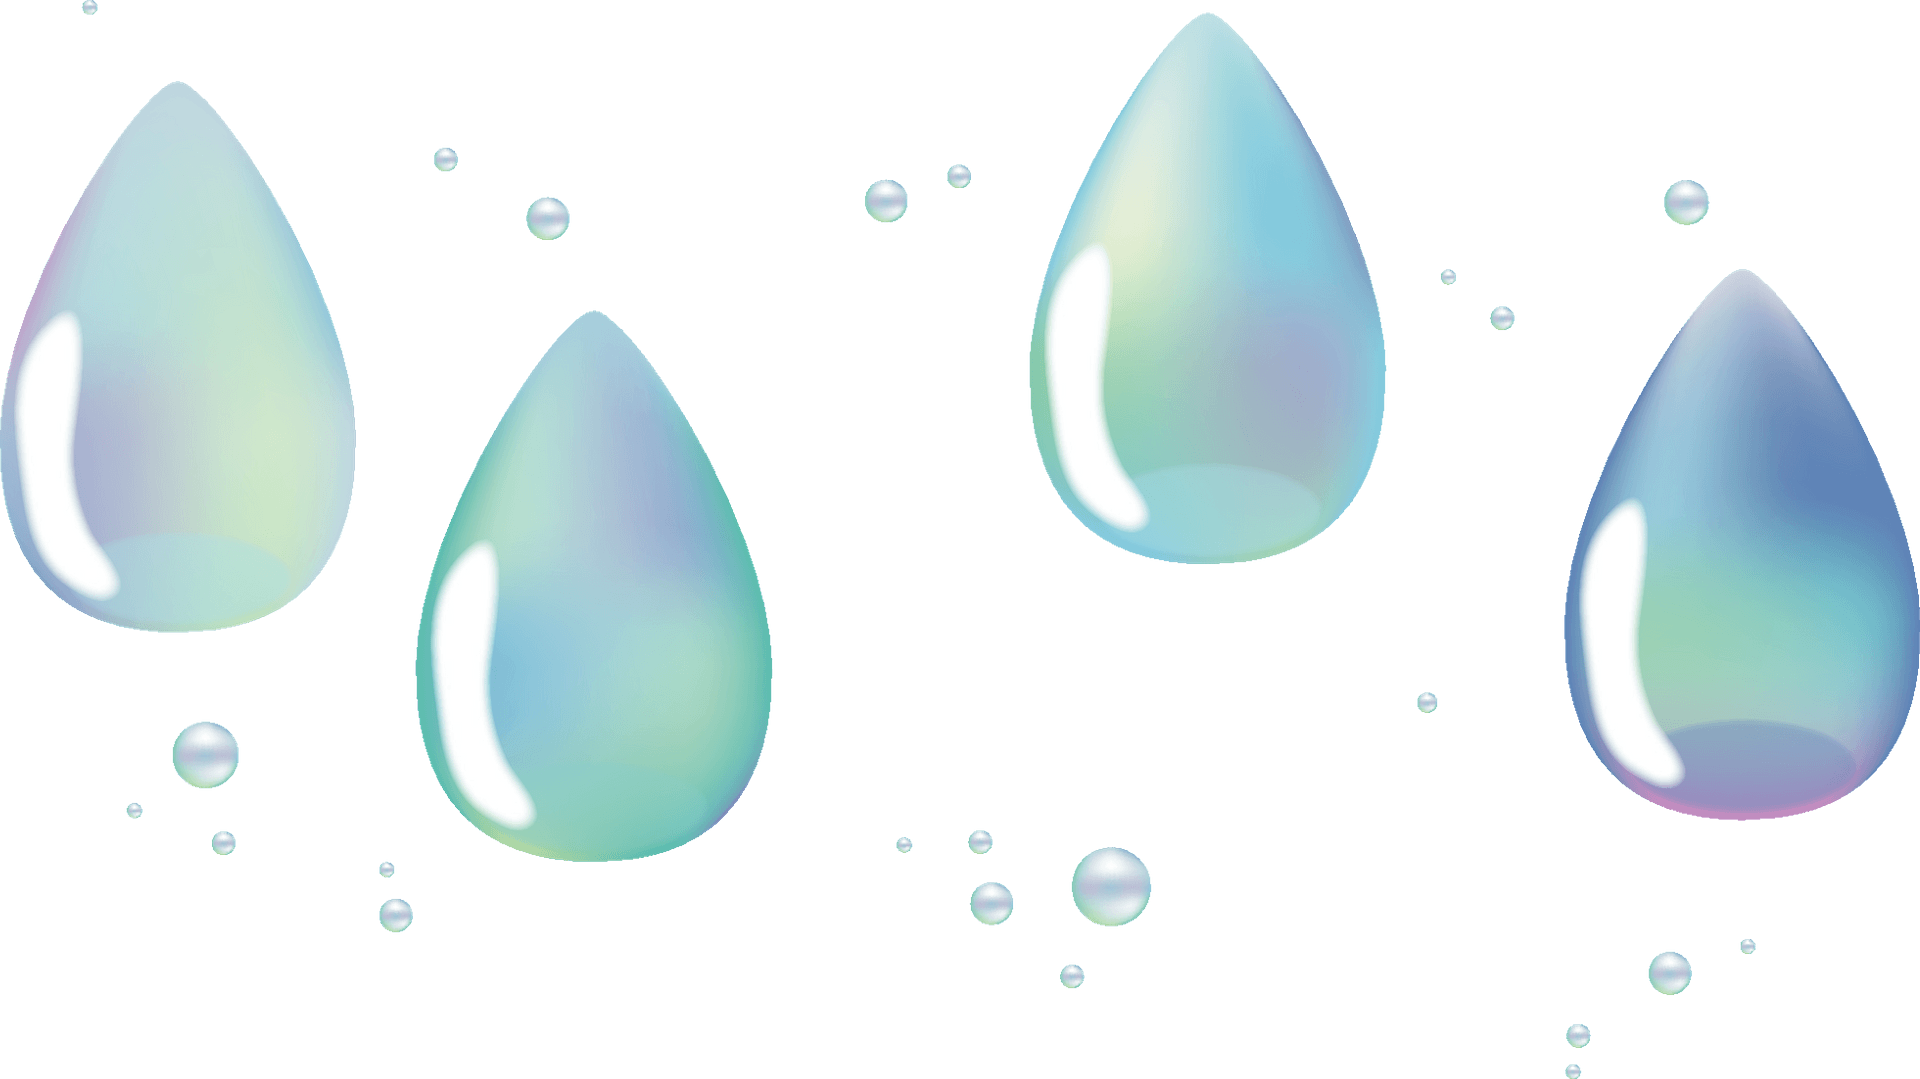 Water Drop SVG Water Drop Clipart Water Drop Cut File for - Clipart ...